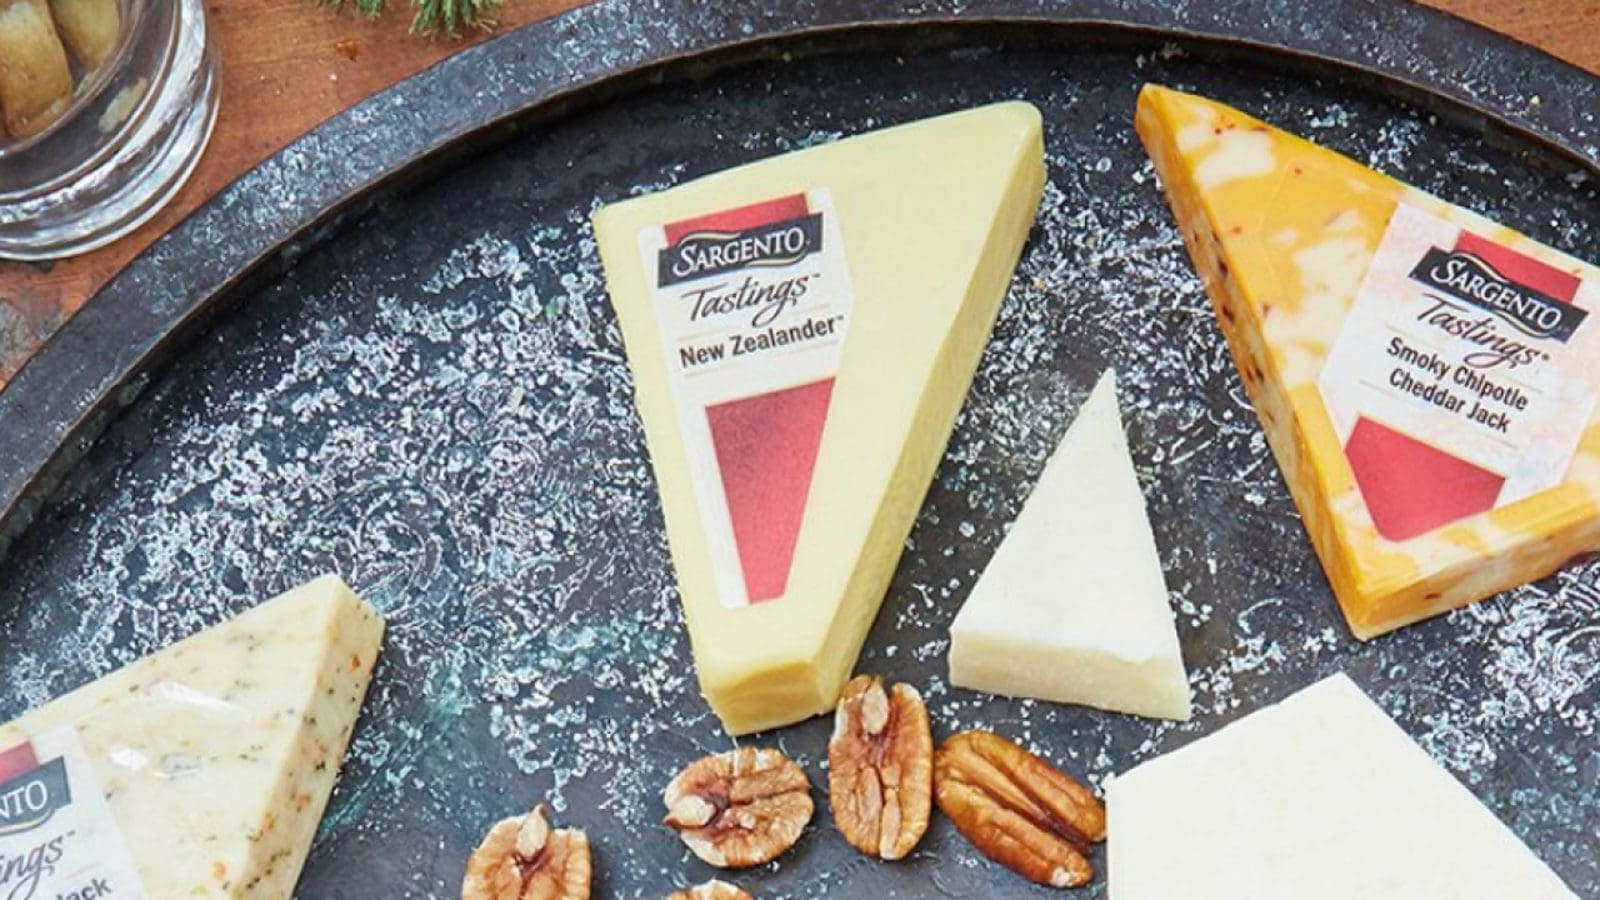 Sargento to expand presence in US cheese market with acquisition of new factory